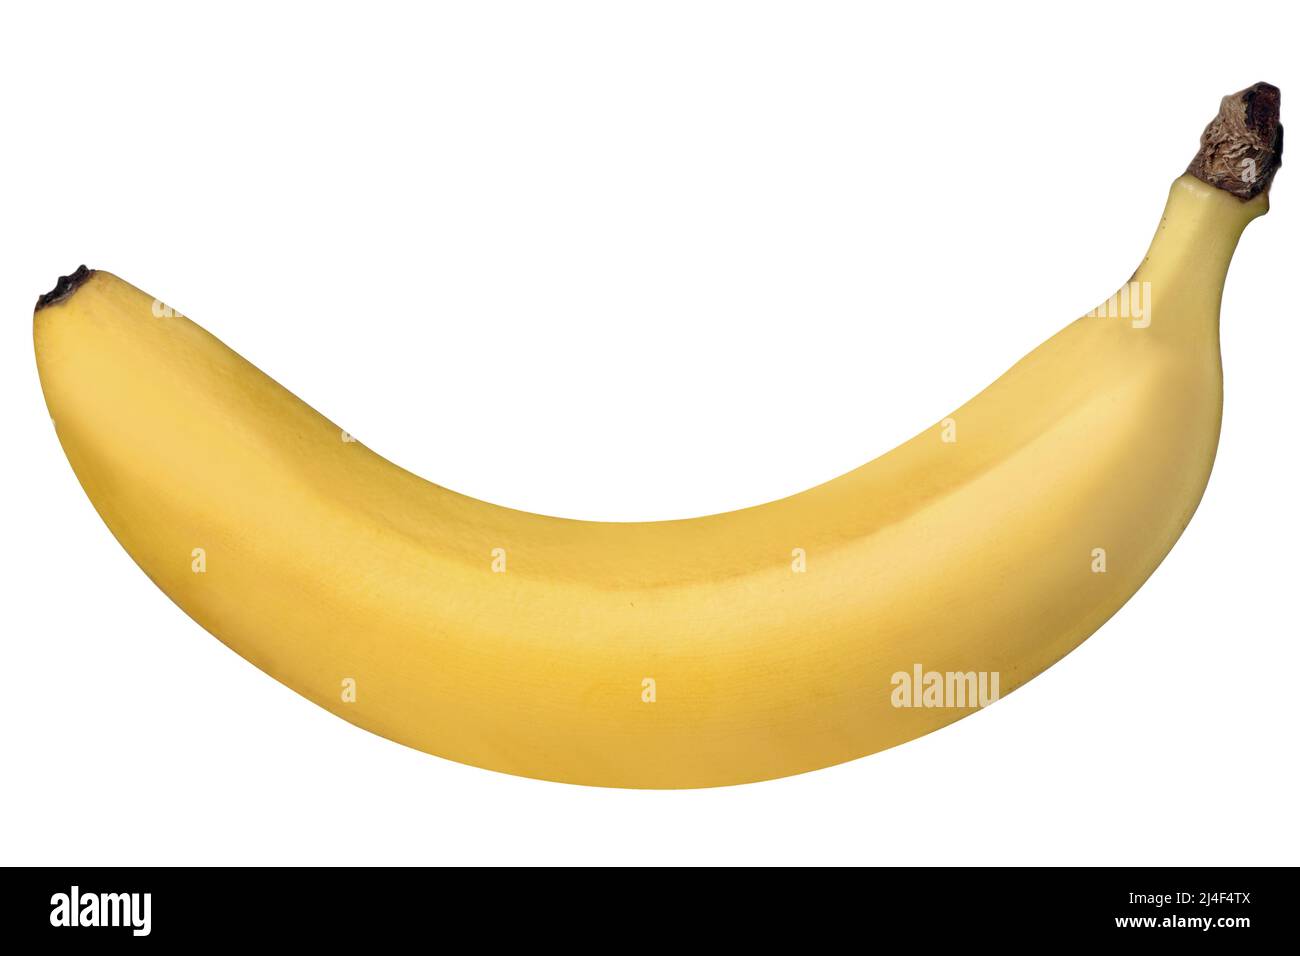 Banana picture. Fresh yellow banana isolated on a white background Stock Photo